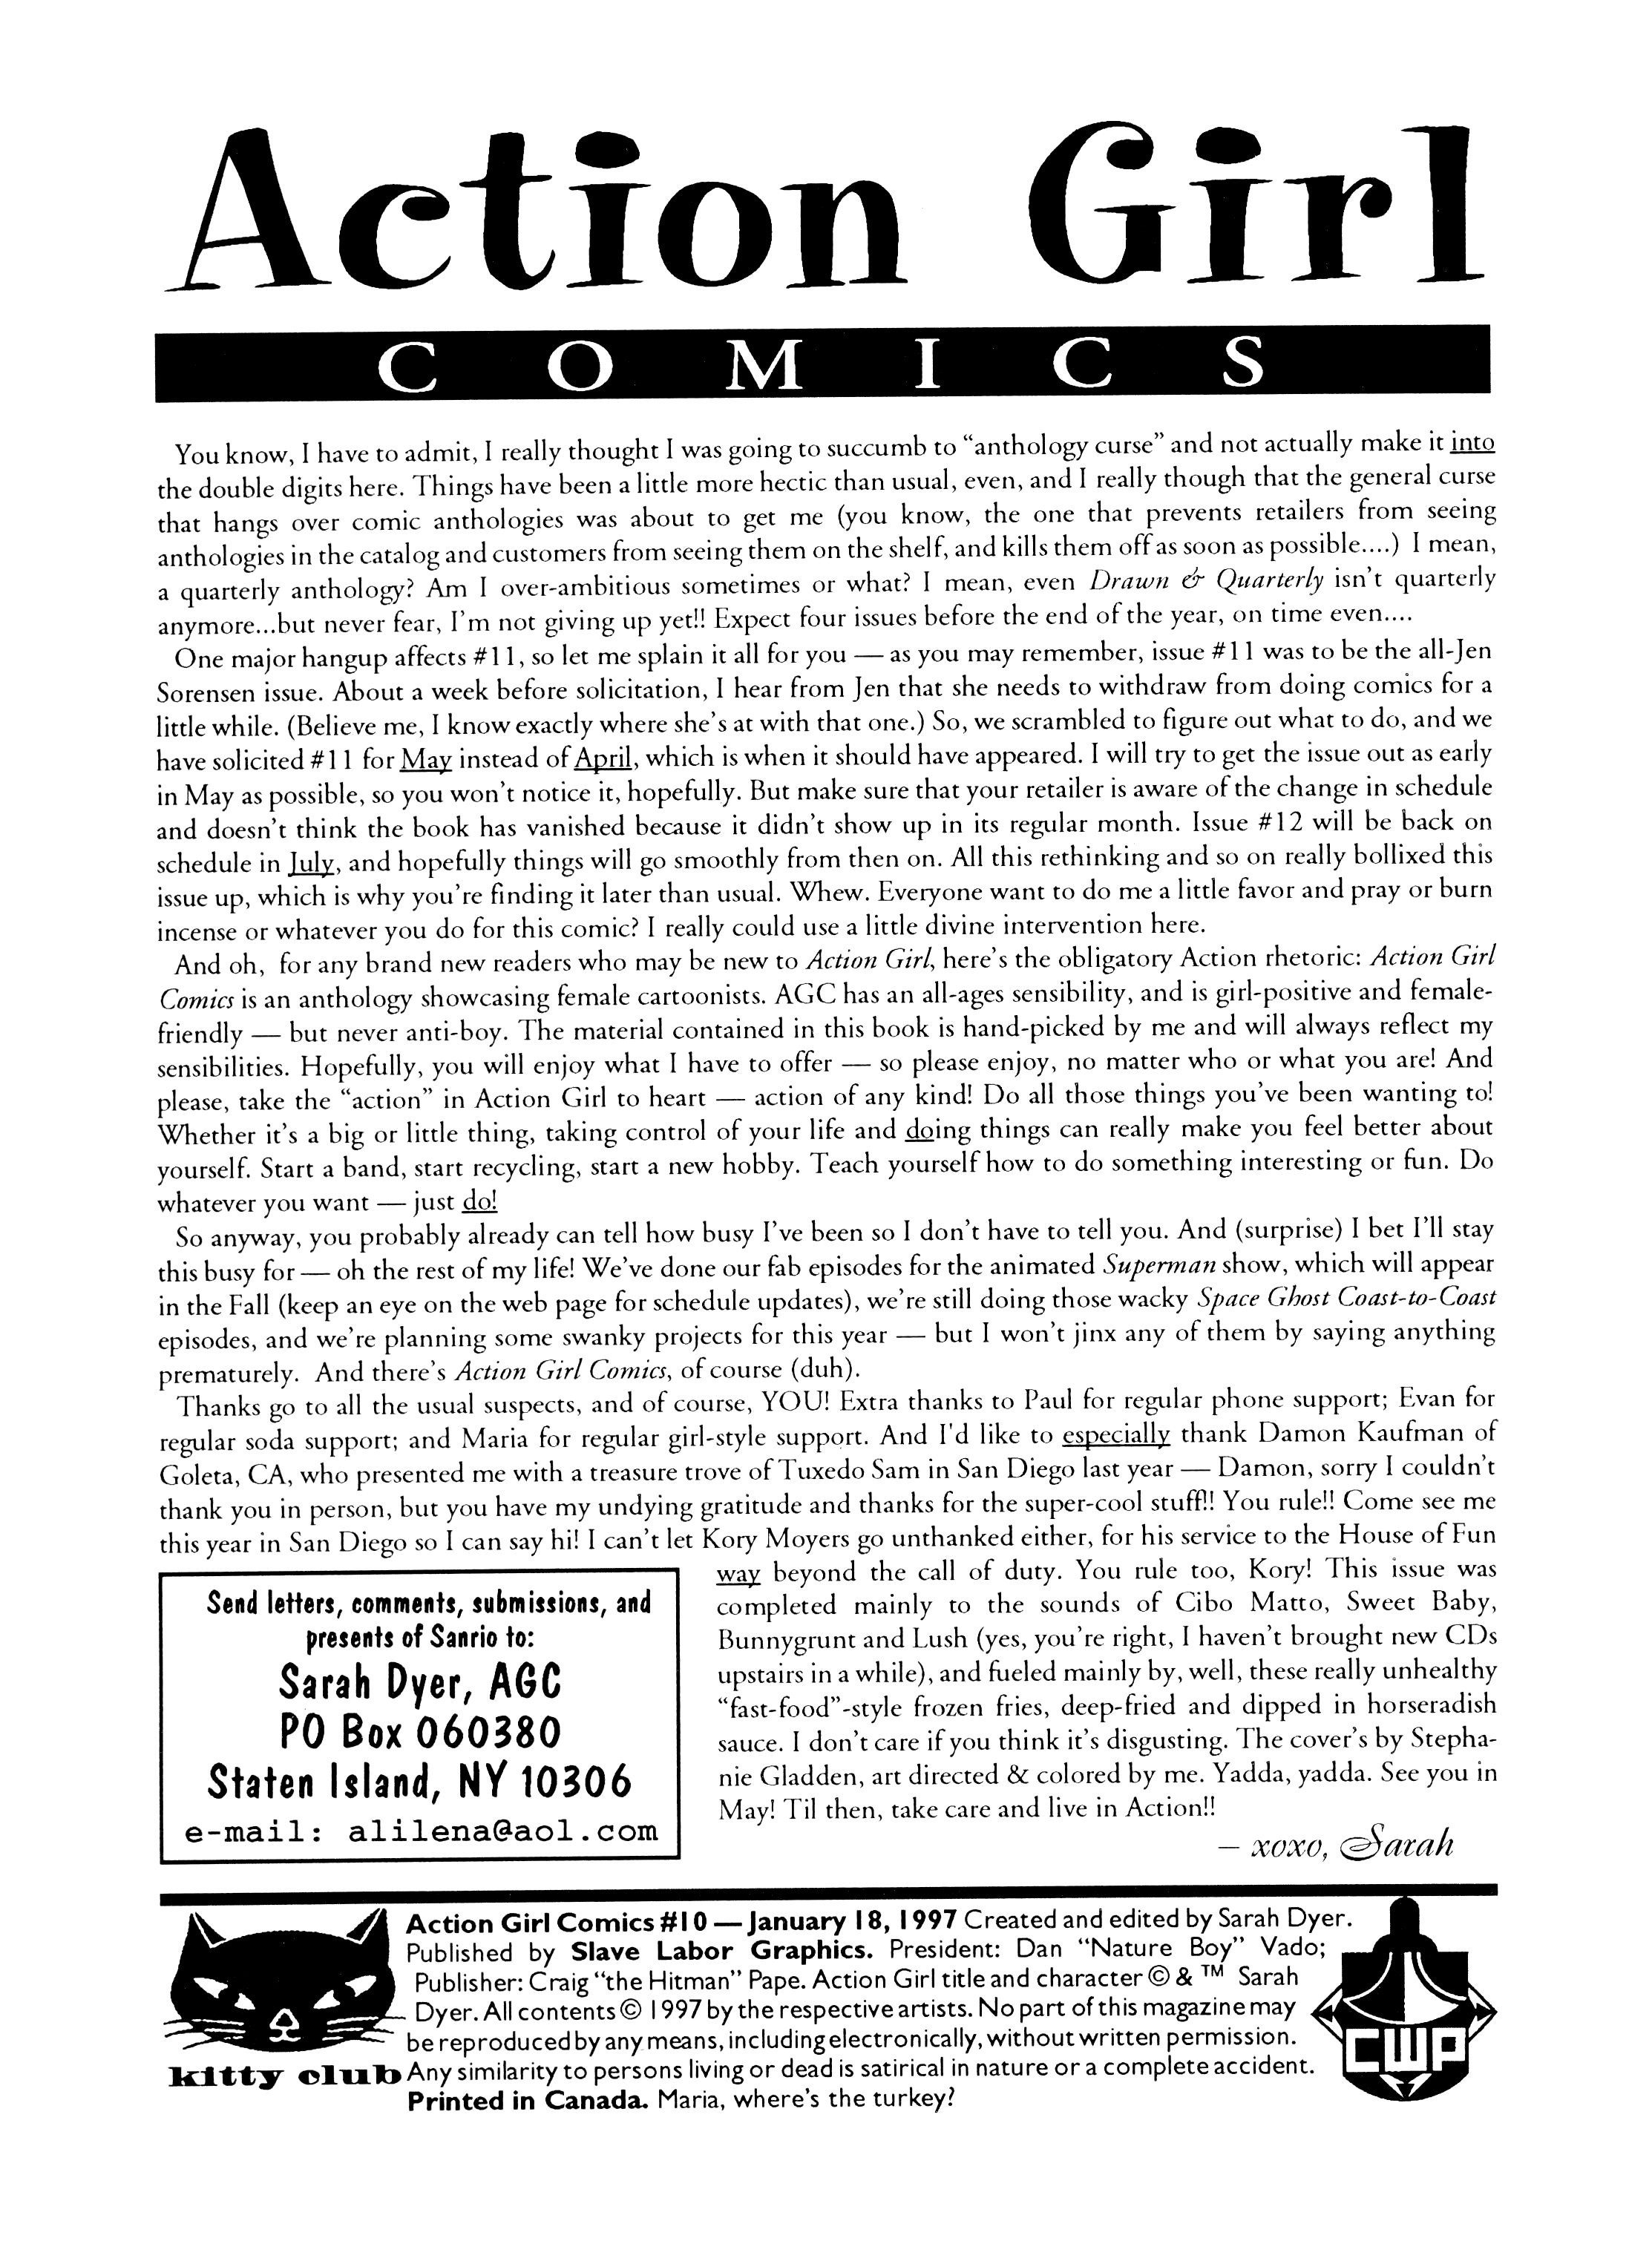 Read online Action Girl Comics comic -  Issue #10 - 2